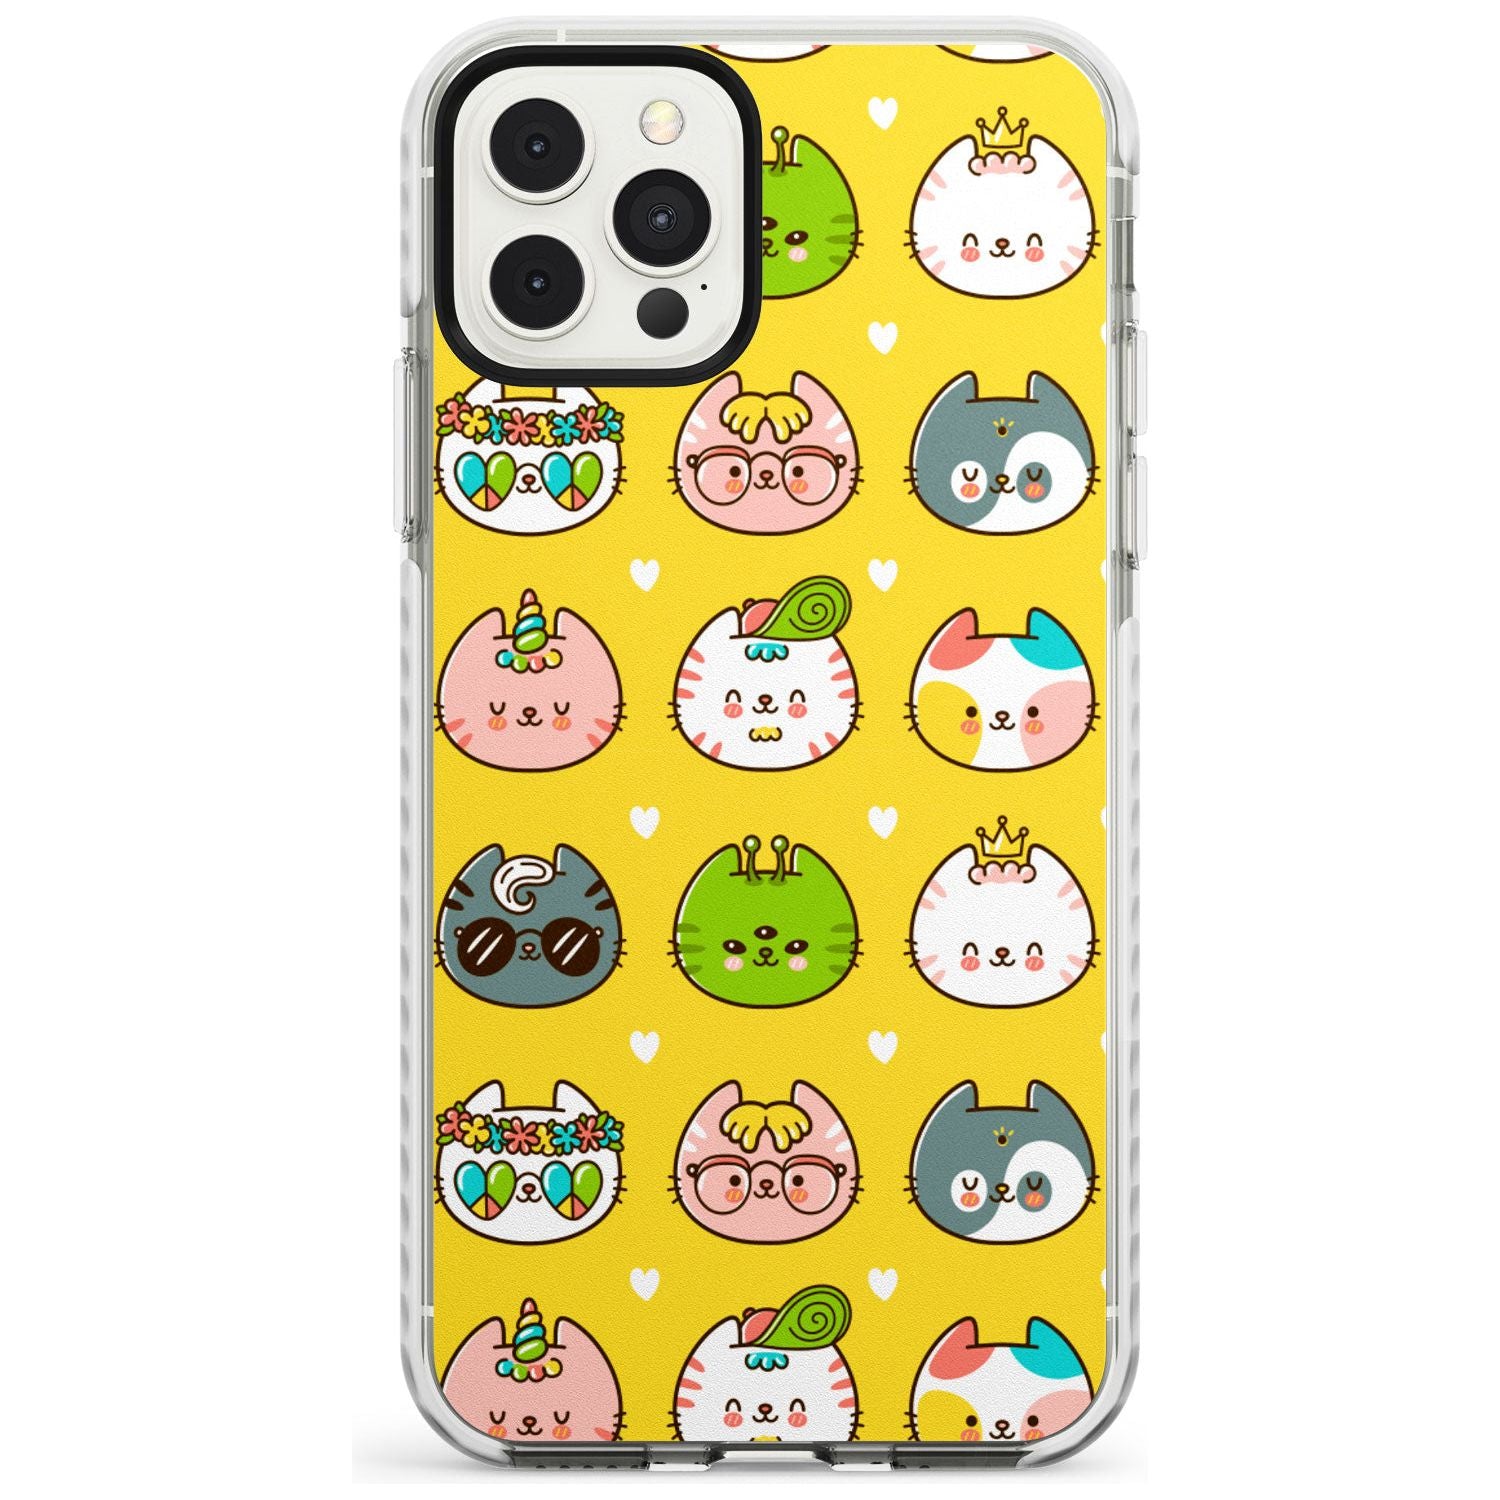 Mythical Cats Kawaii Pattern Impact Phone Case for iPhone 11 Pro Max